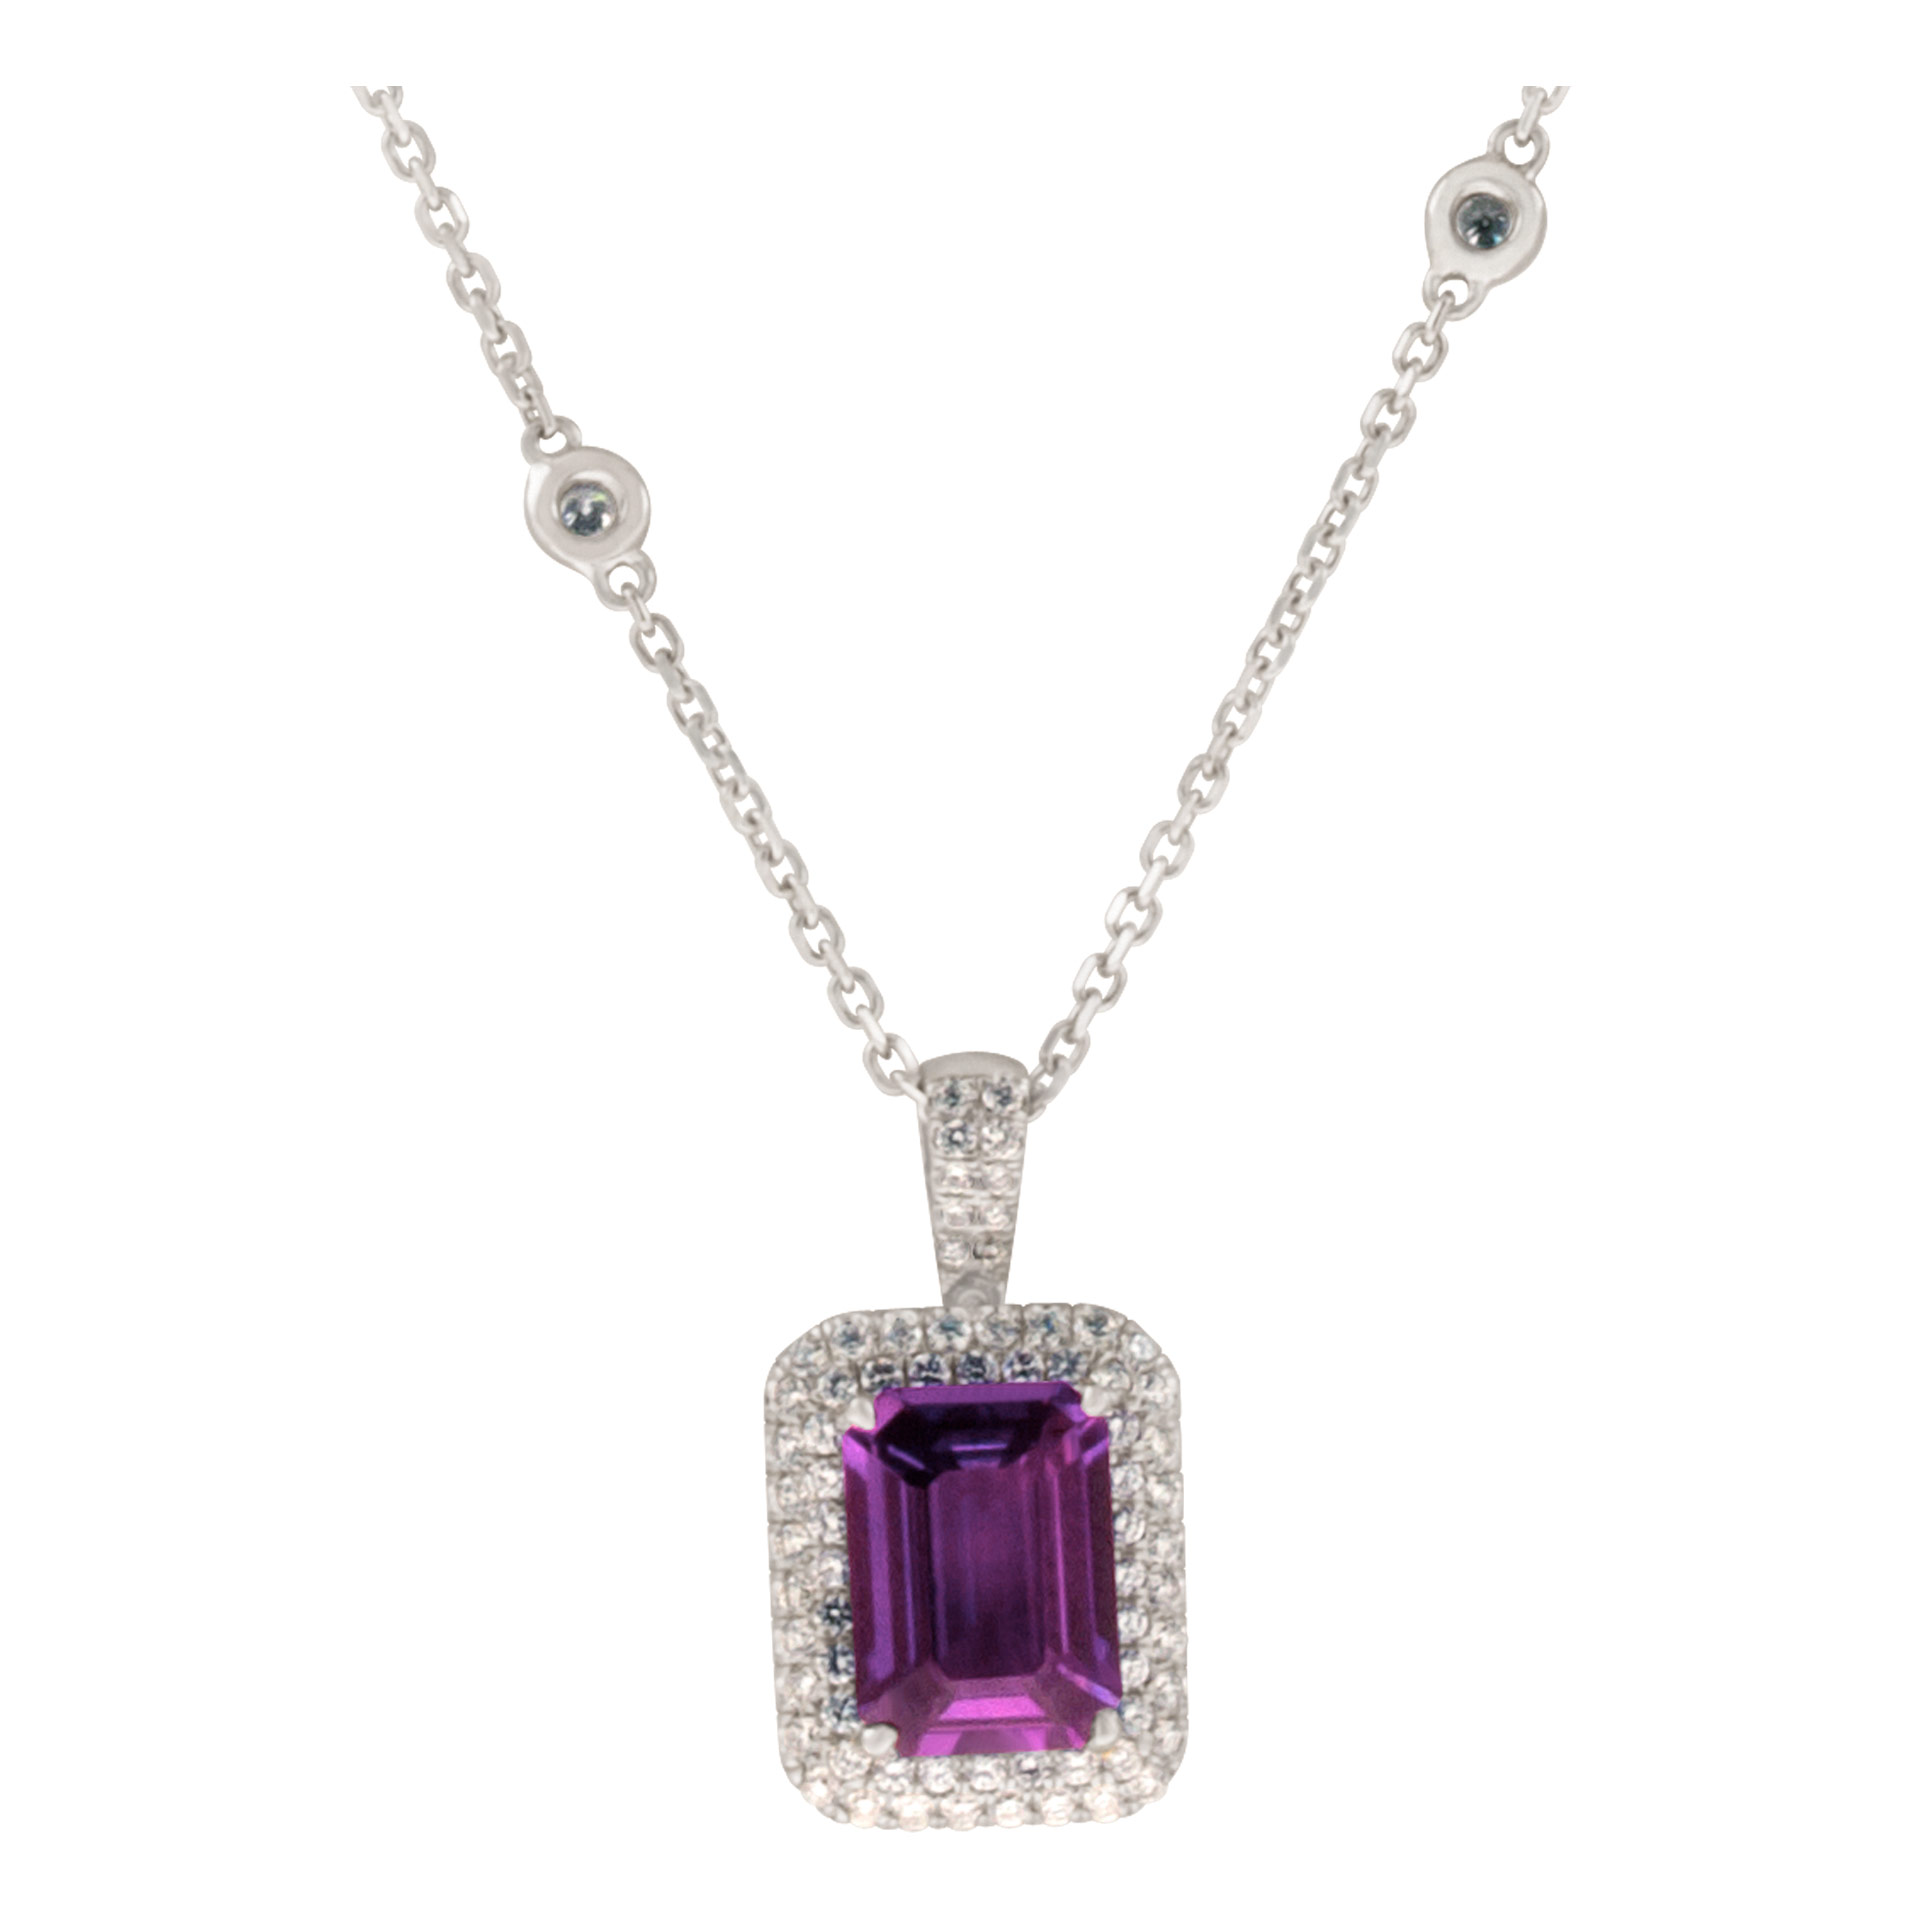 Purple sapphire pendant necklace in 18k white gold with diamond accents. 3.87 carat sapphire